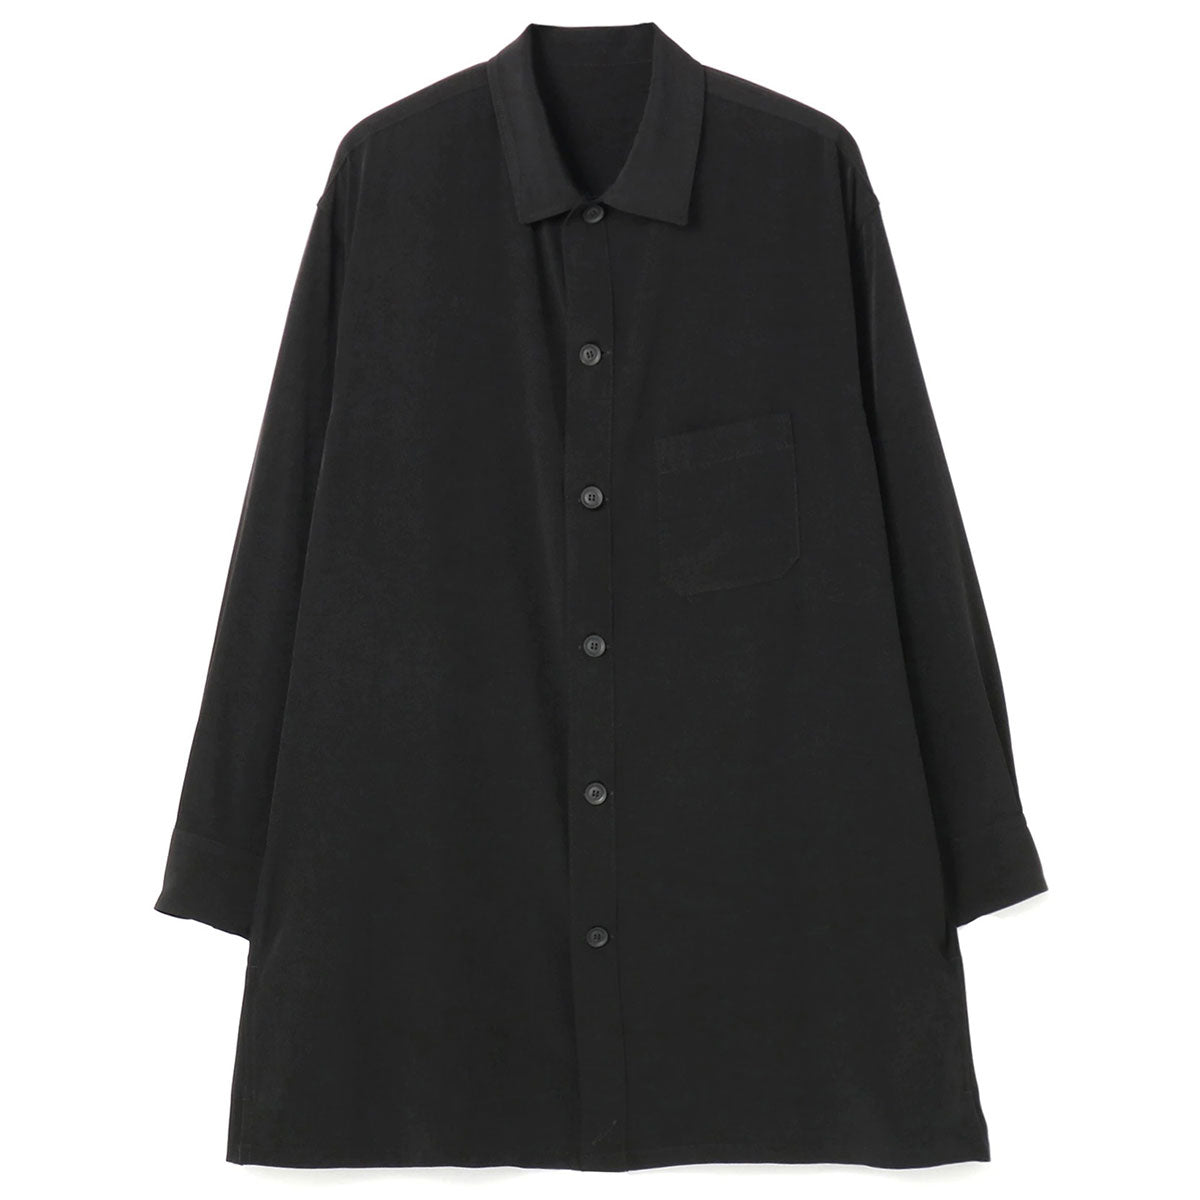 TA/TUXEDO OPEN COLLAR FRONT PLACKET BLOUSE - Why are you here?